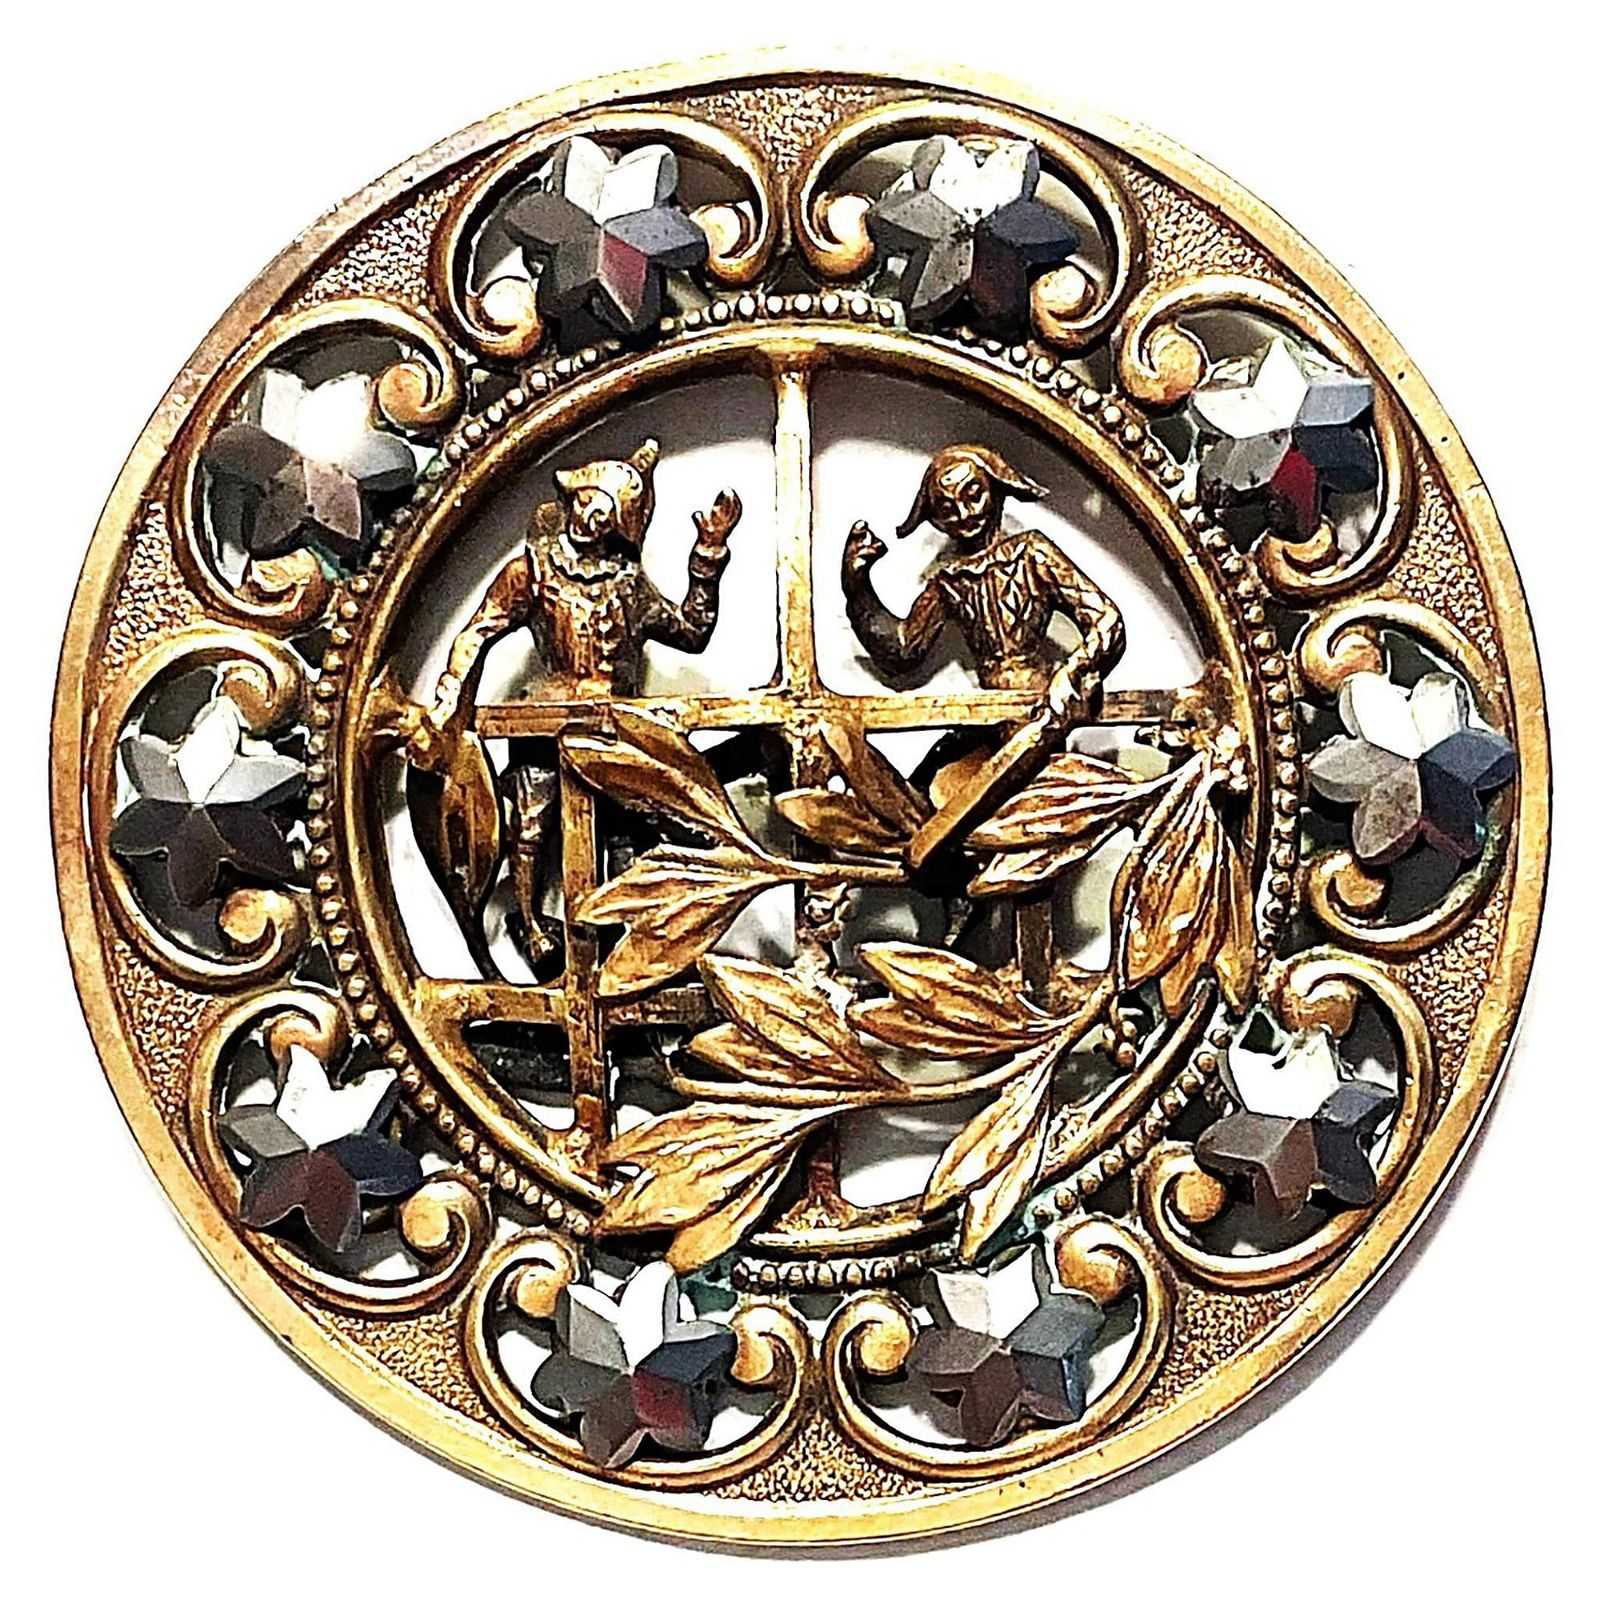 Extra-large 19th-century brass and steel Punchinello and Harlequin button, estimated at $1,000-$2,000 at Lion and Unicorn.